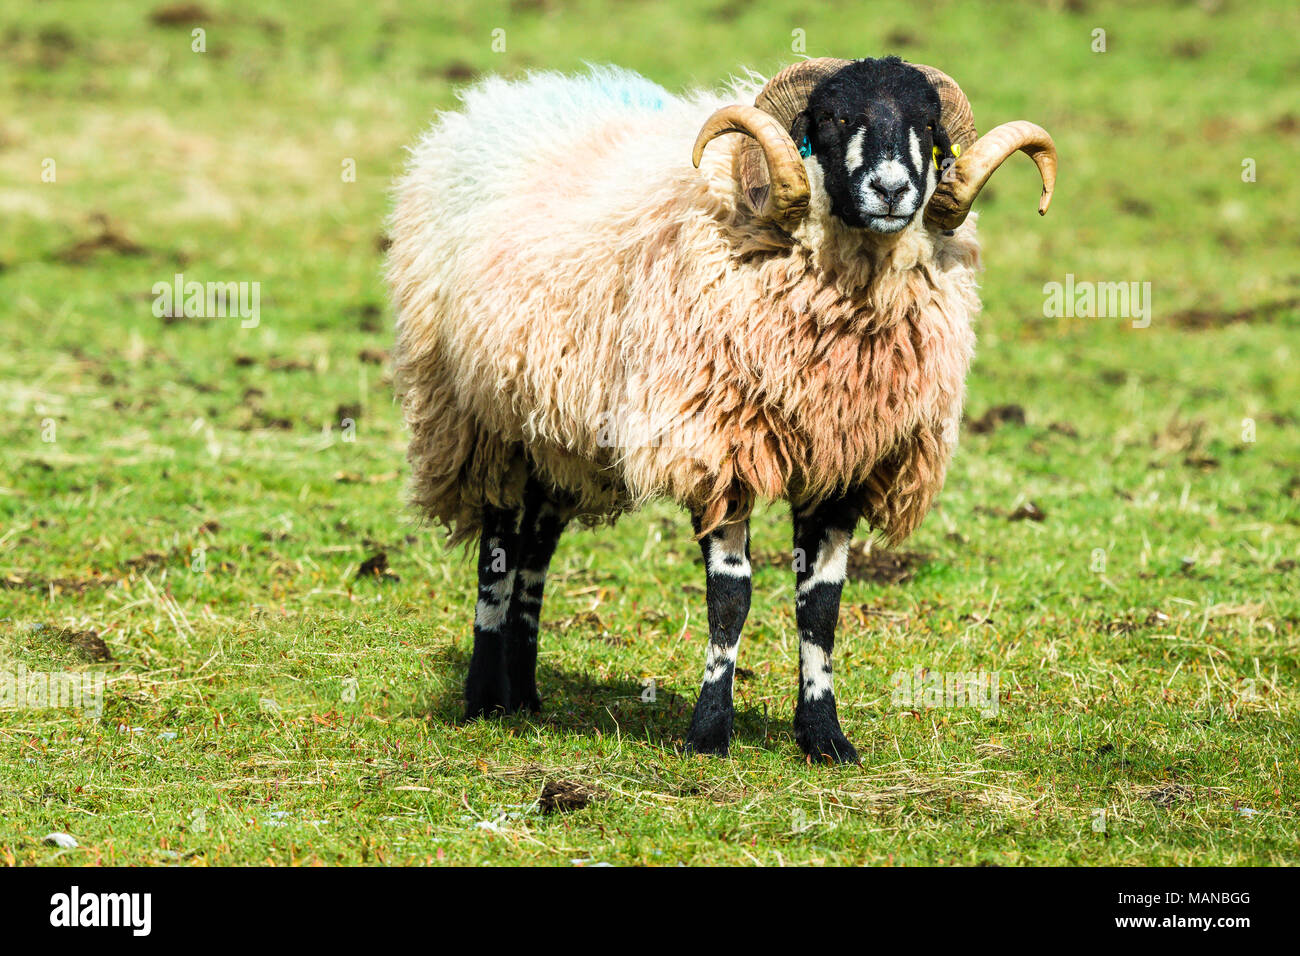 Dalesbred Ram facing forward with two very curly horns.  Hubberholme, Yorkshire Dales, England, Space for copy.   Landscape Stock Photo